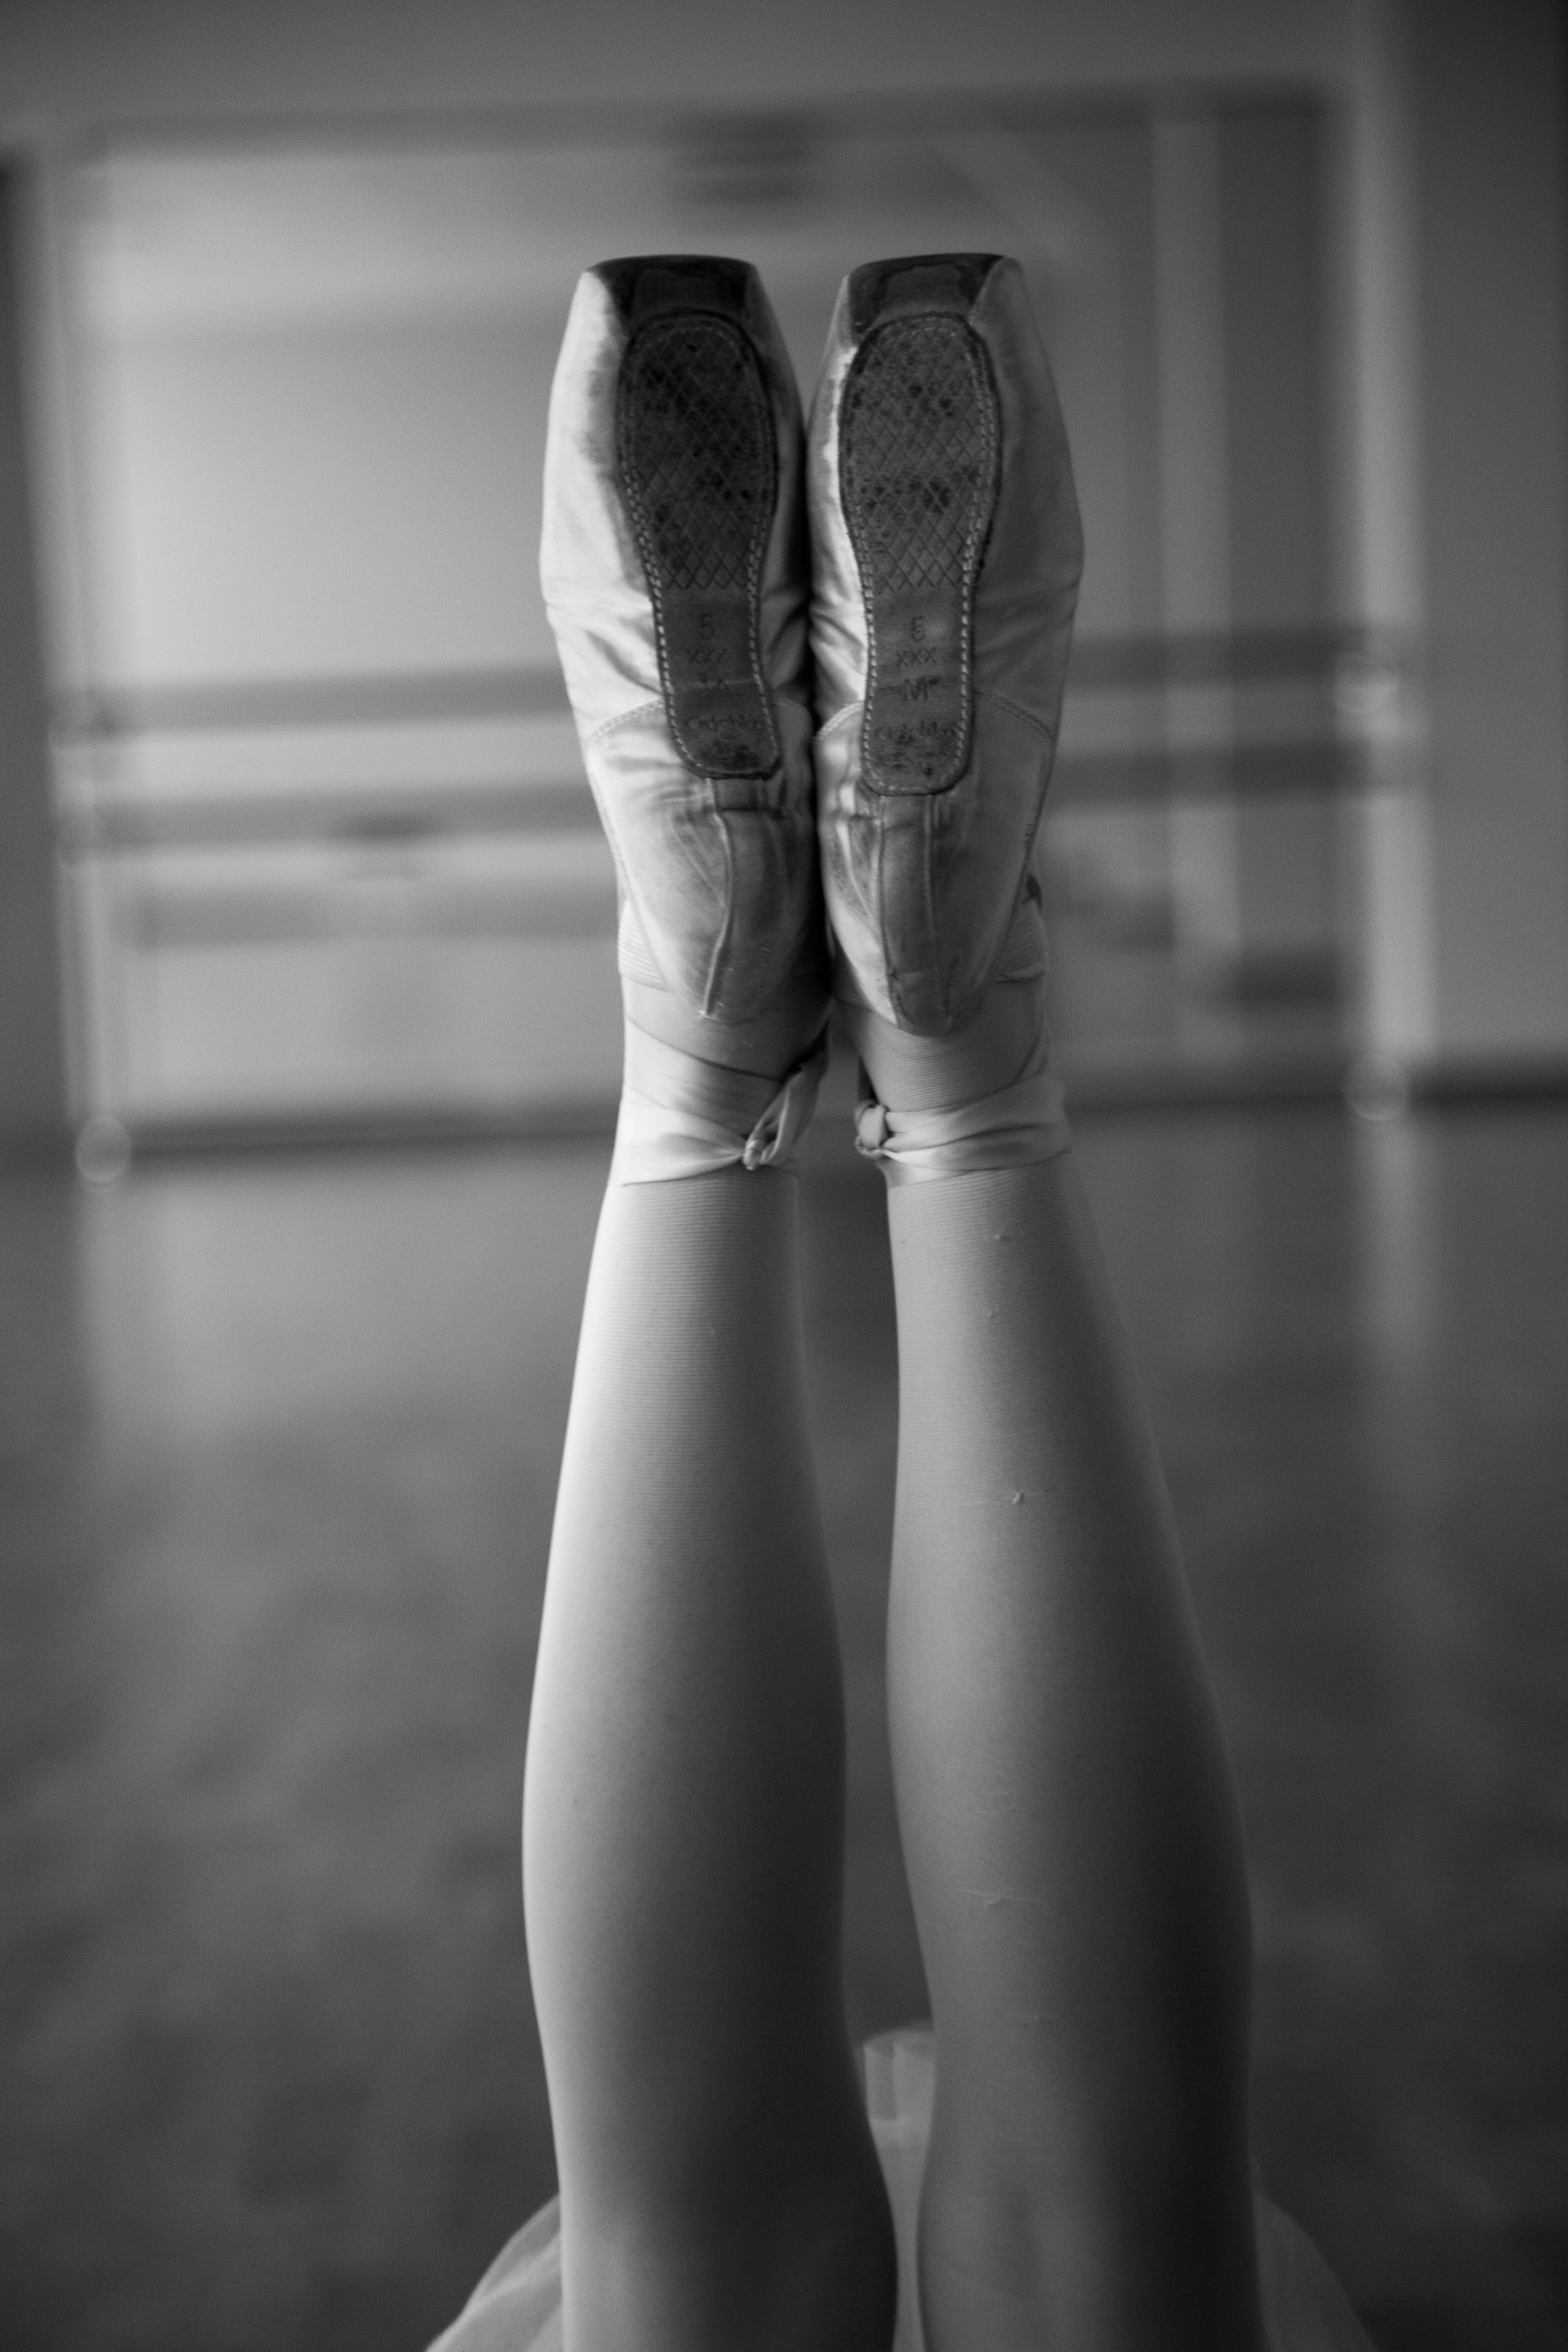 Pointe shoes